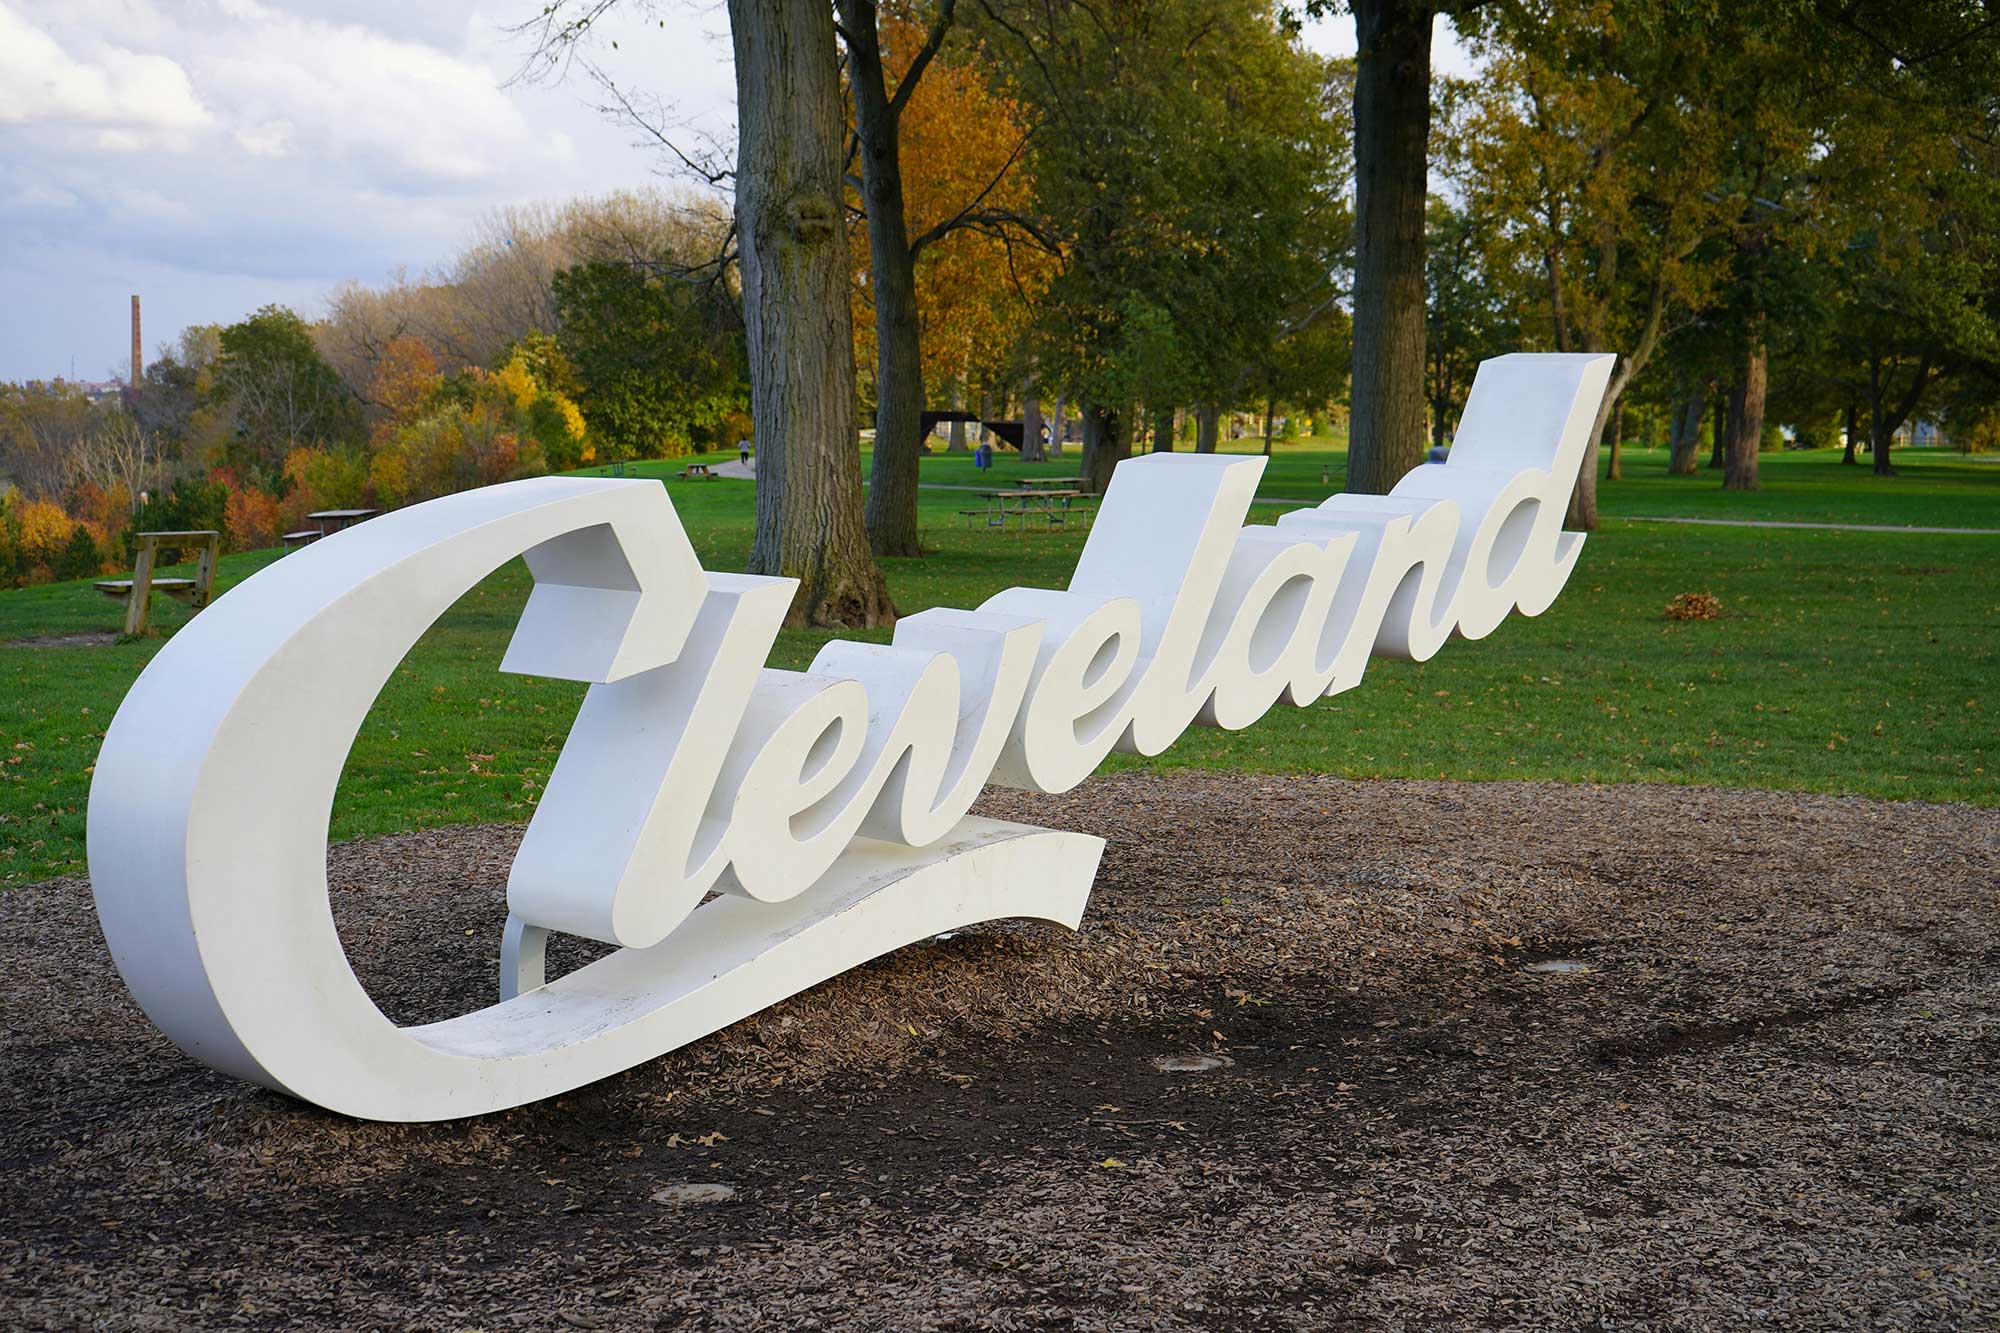 The Cleveland sign in Cleveland, Ohio.